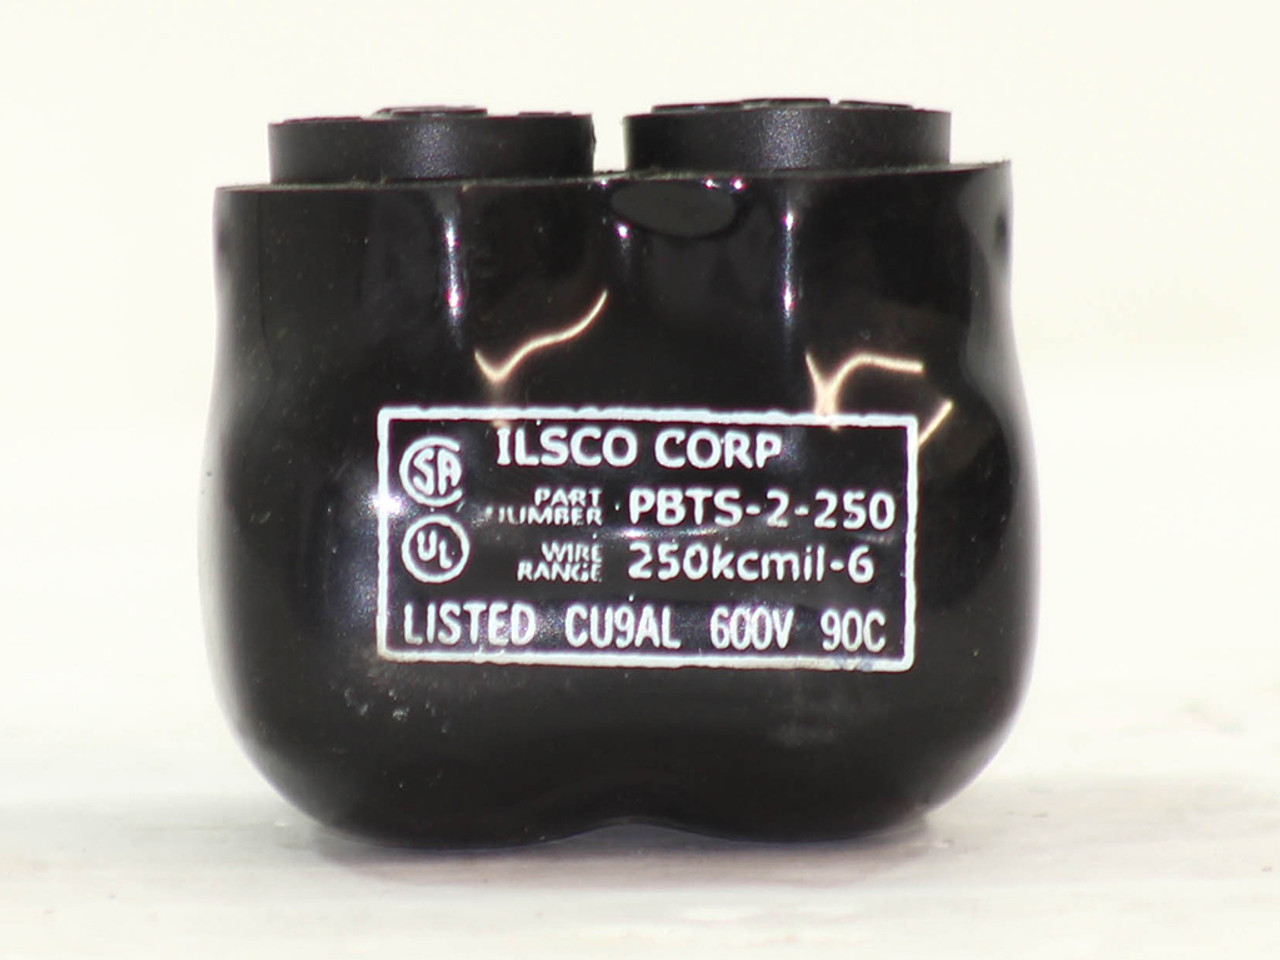 Ilsco PBTS-2-250 Nimbus Insulated Multi-Tap Connector 2 Ports Single Sided Entry